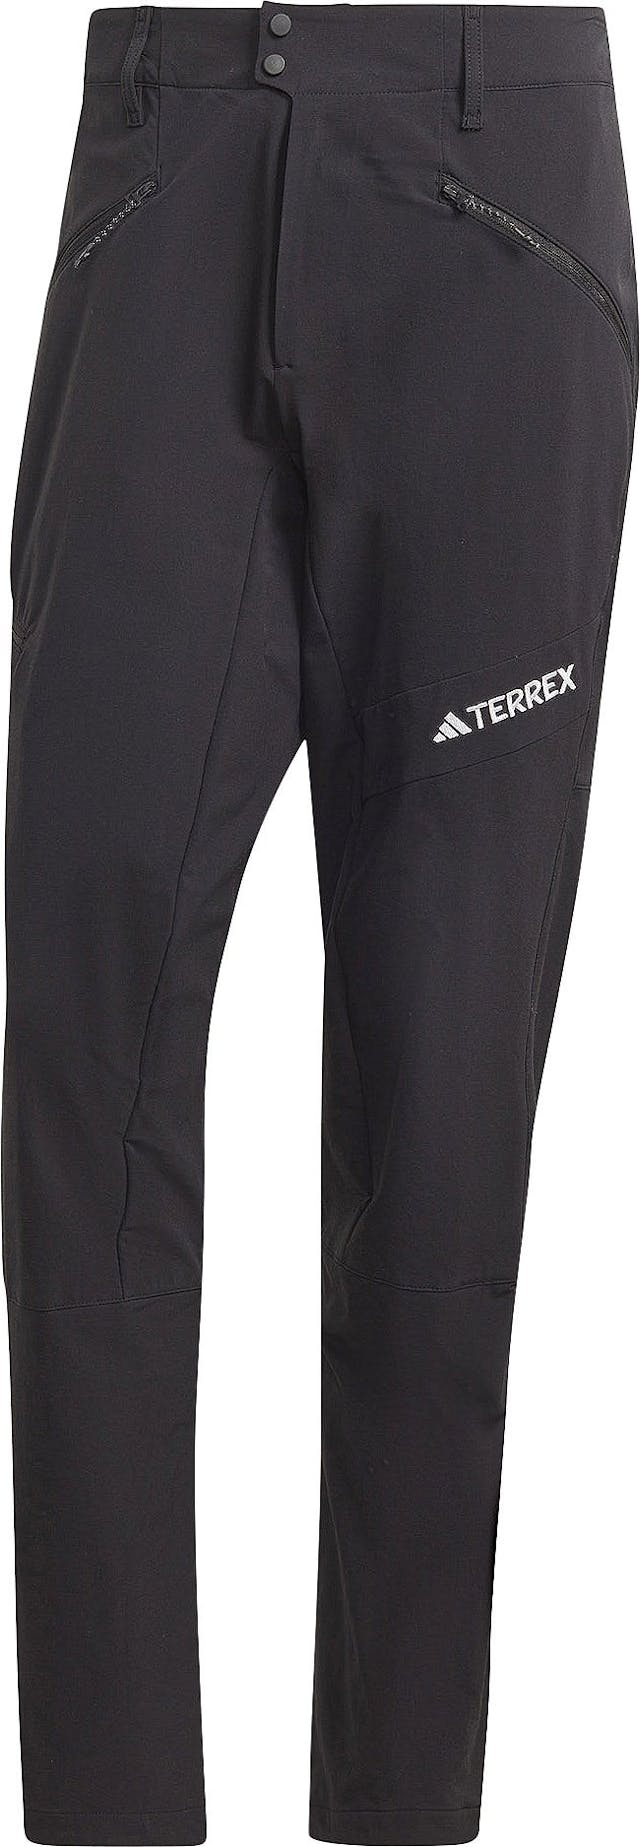 Product image for Terrex Techrock Mountaineering Soft Shell Tracksuit Bottom - Men's